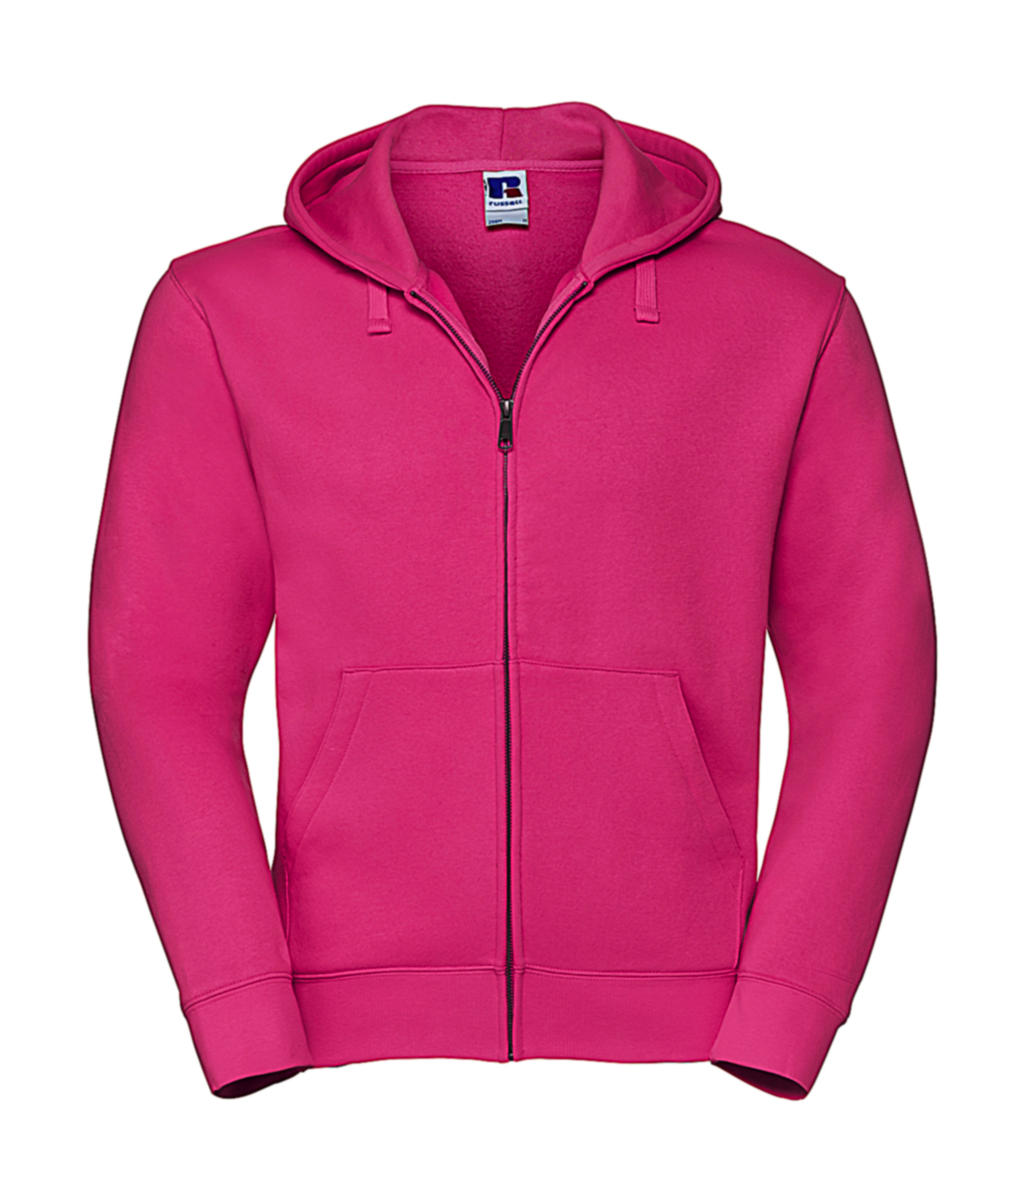  Mens Authentic Zipped Hood in Farbe Fuchsia